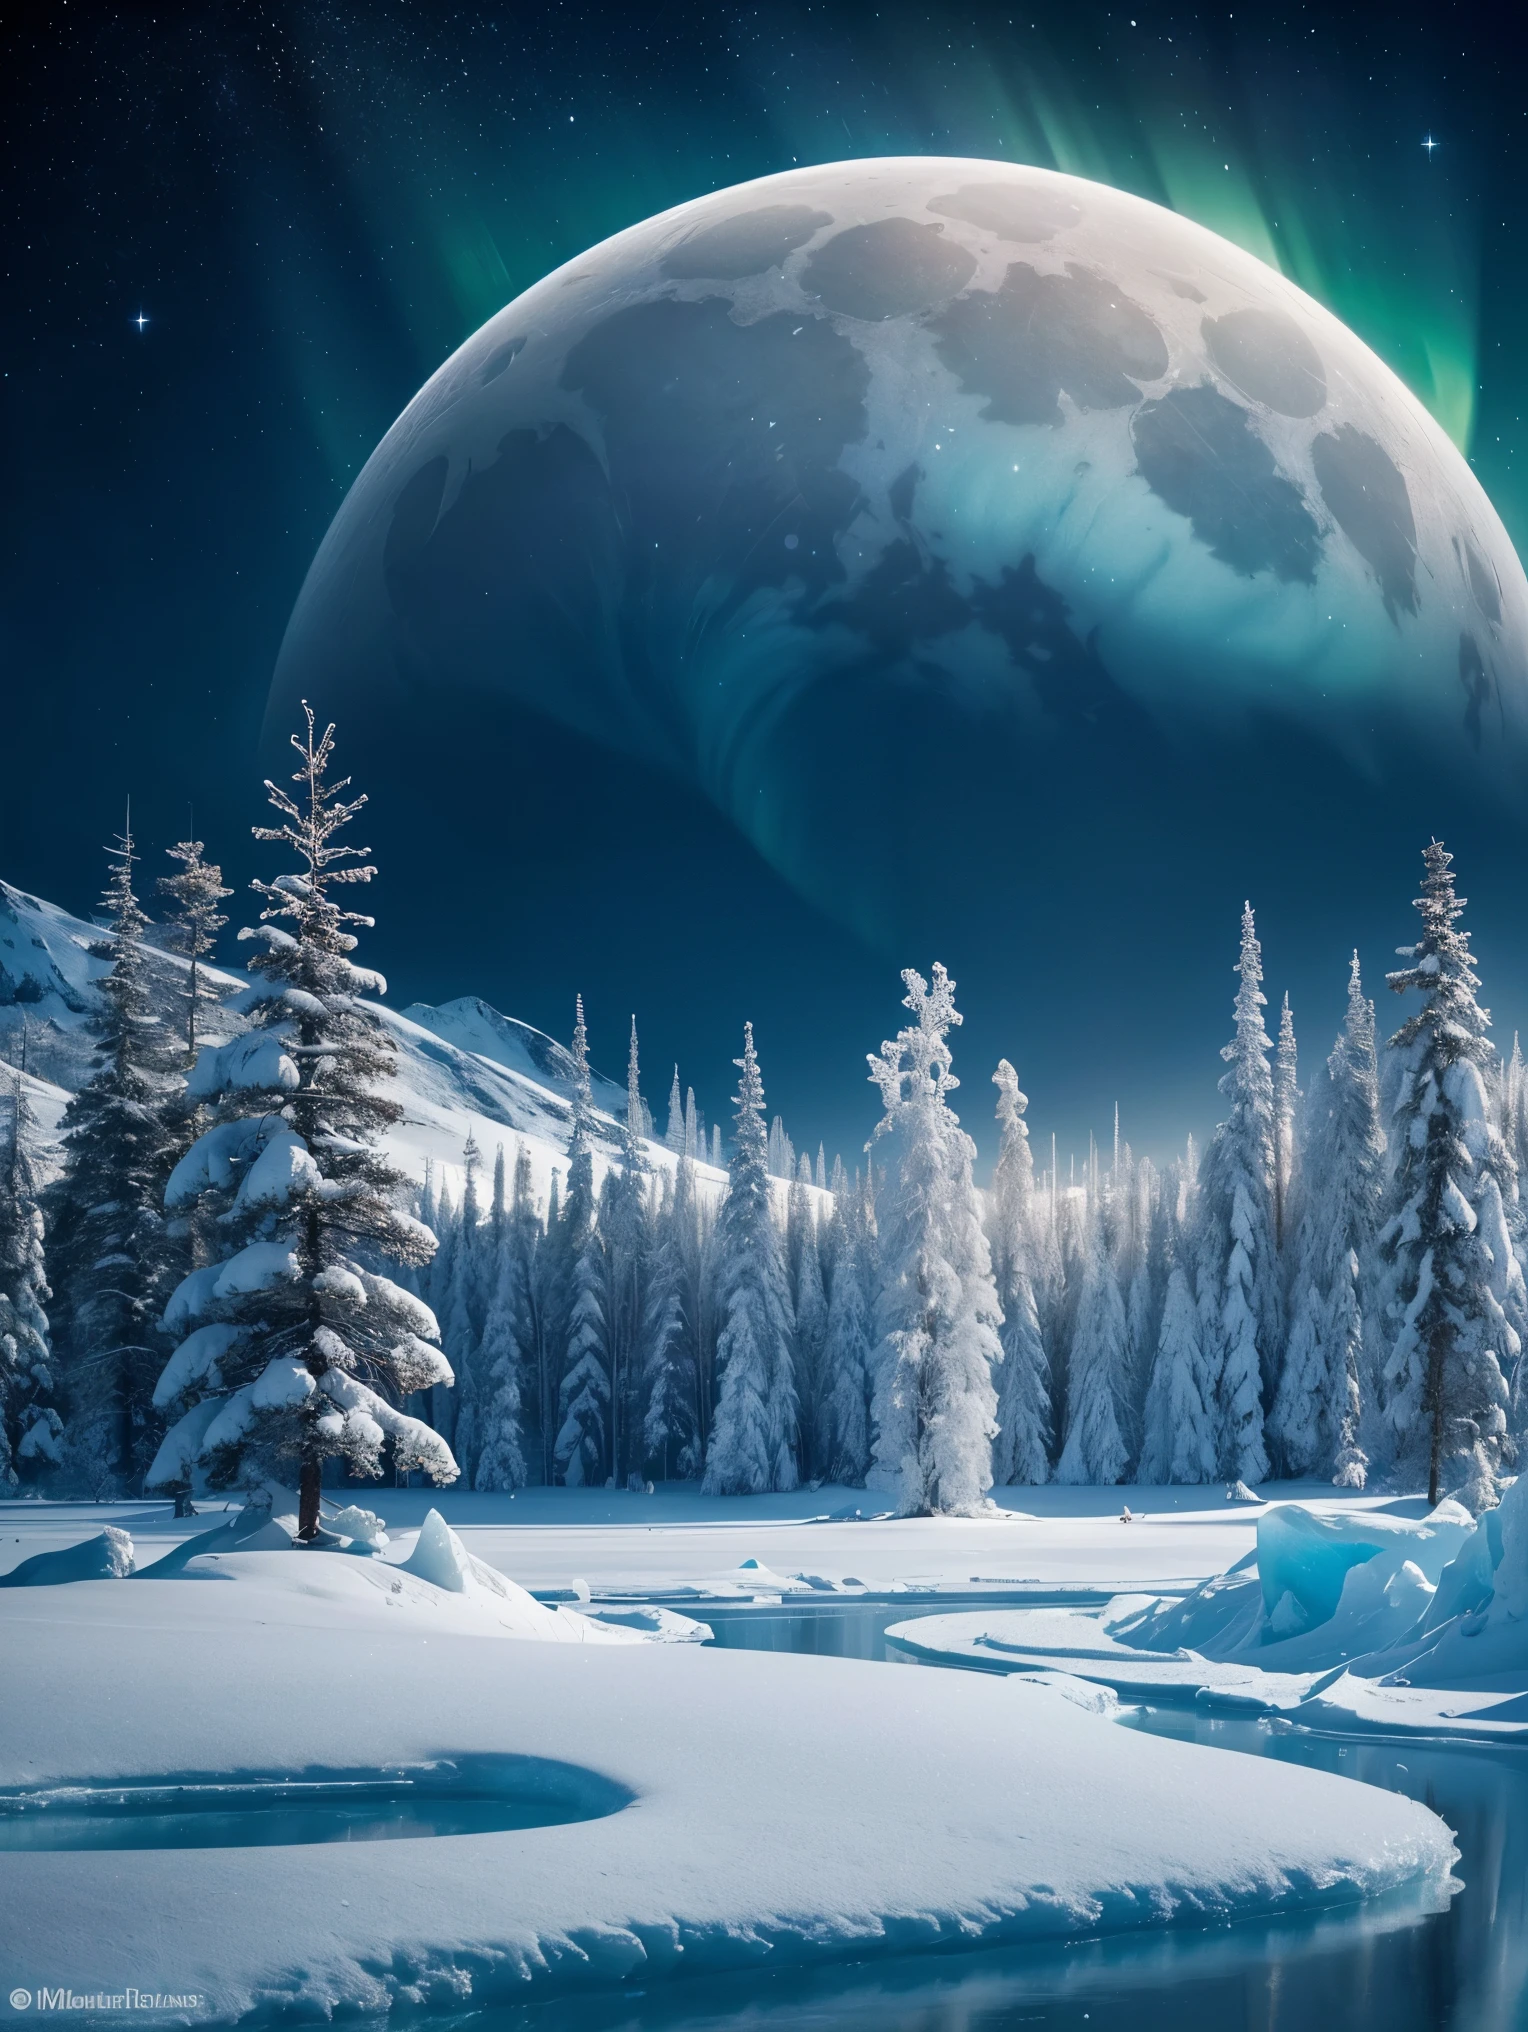 An exquisite arctic landscape painted in various shades of ethereal blue, showcasing the untouched beauty of icy glaciers, sparkling snow-covered peaks, and an expansive frozen forest stretching as far as the eye can see. A landscape with feminine curves. Mounds reminiscent of the 
the shape of generous breasts. The serene atmosphere is intensified by the soft glow of the moon reflecting off the crystalline ice, creating a captivating tableau of pure tranquility and awe-inspiring natural wonders. Northern lights. National geographic style. Masterpiece. UHD.